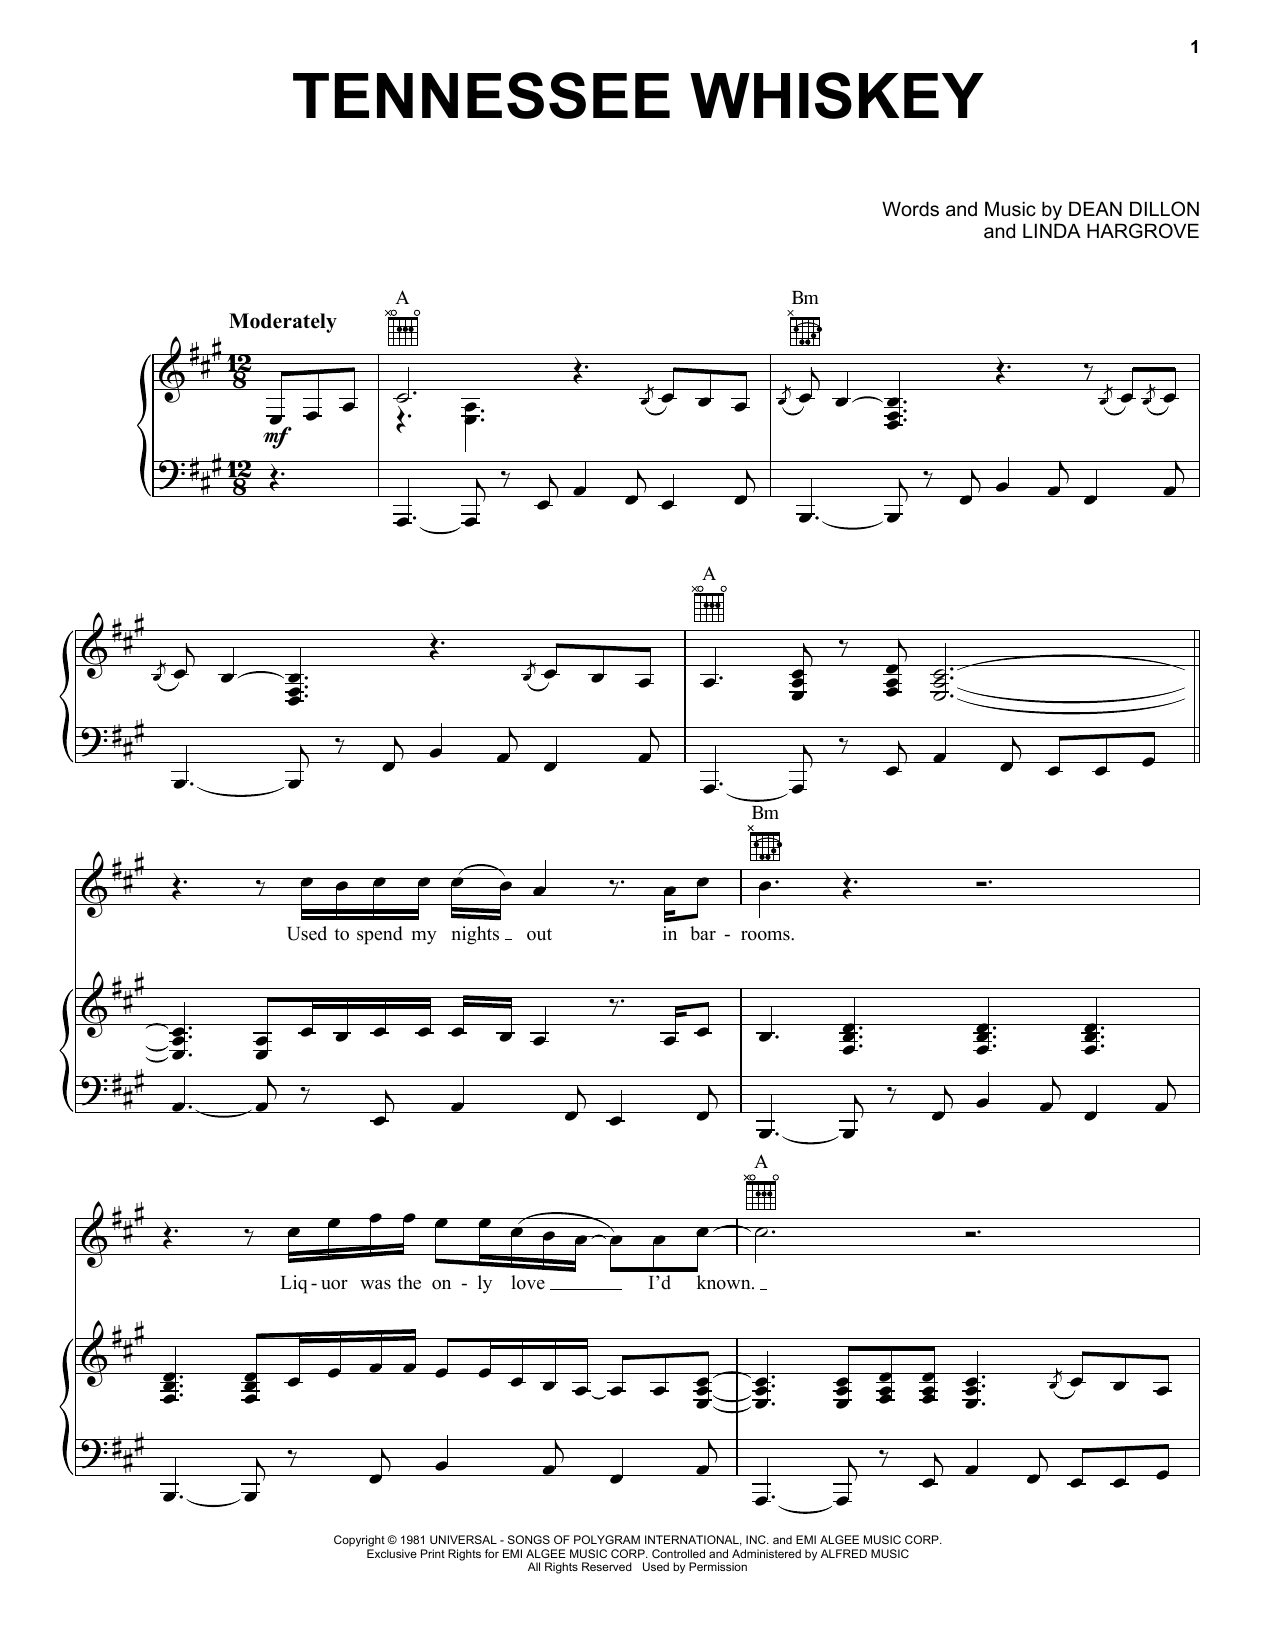 chris-stapleton-smooth-as-tennessee-whiskey-sheet-music-notes